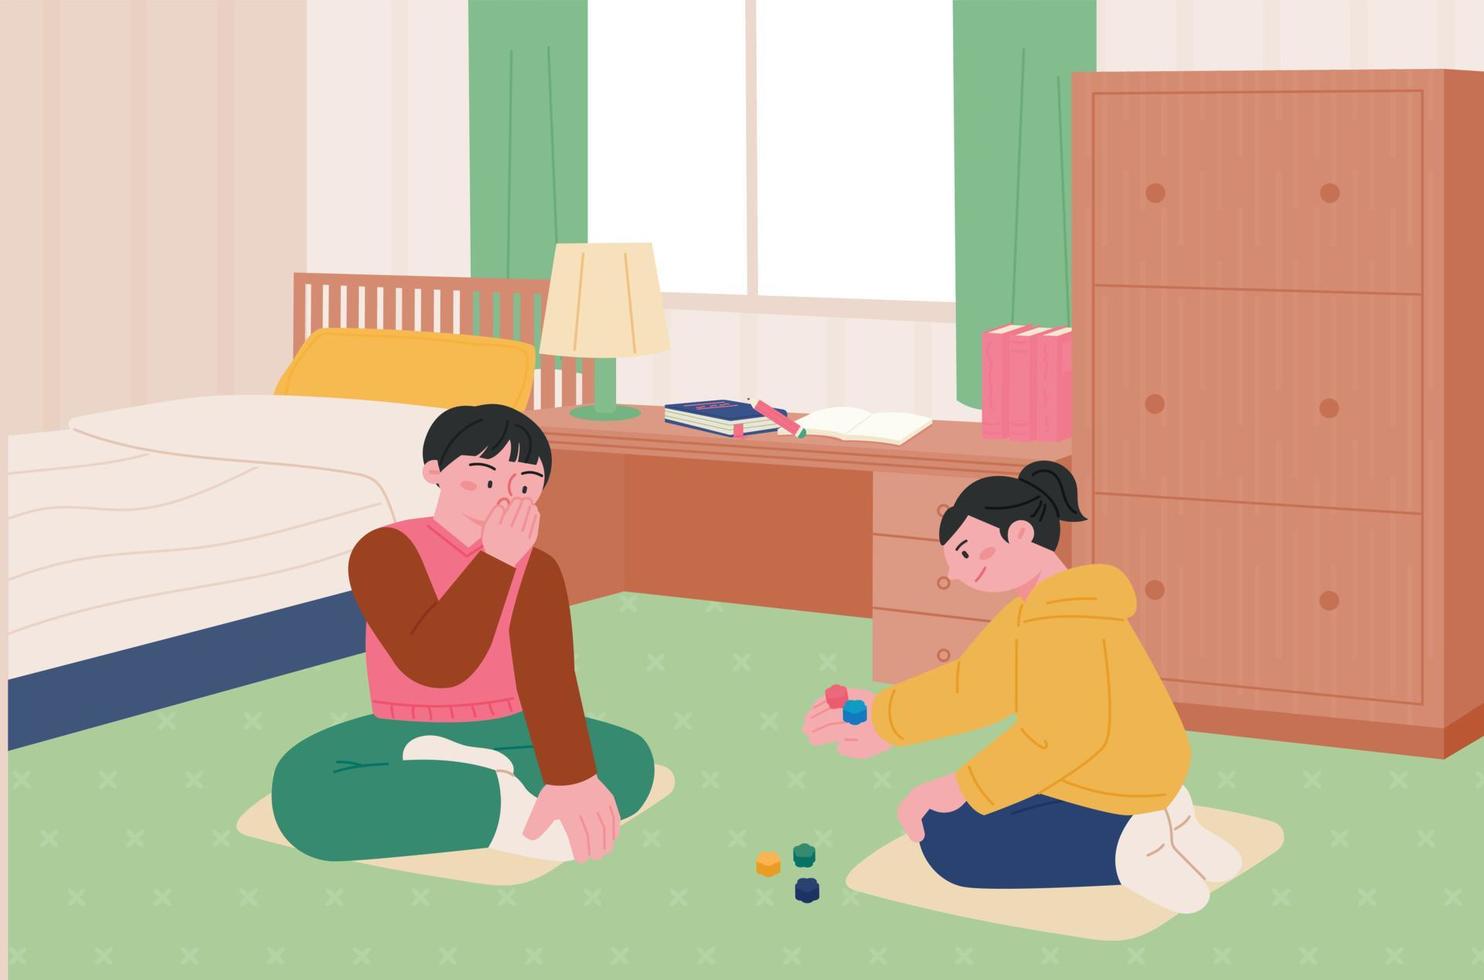 Korean childhood games. Children sitting in the room and playing the five stone game. vector